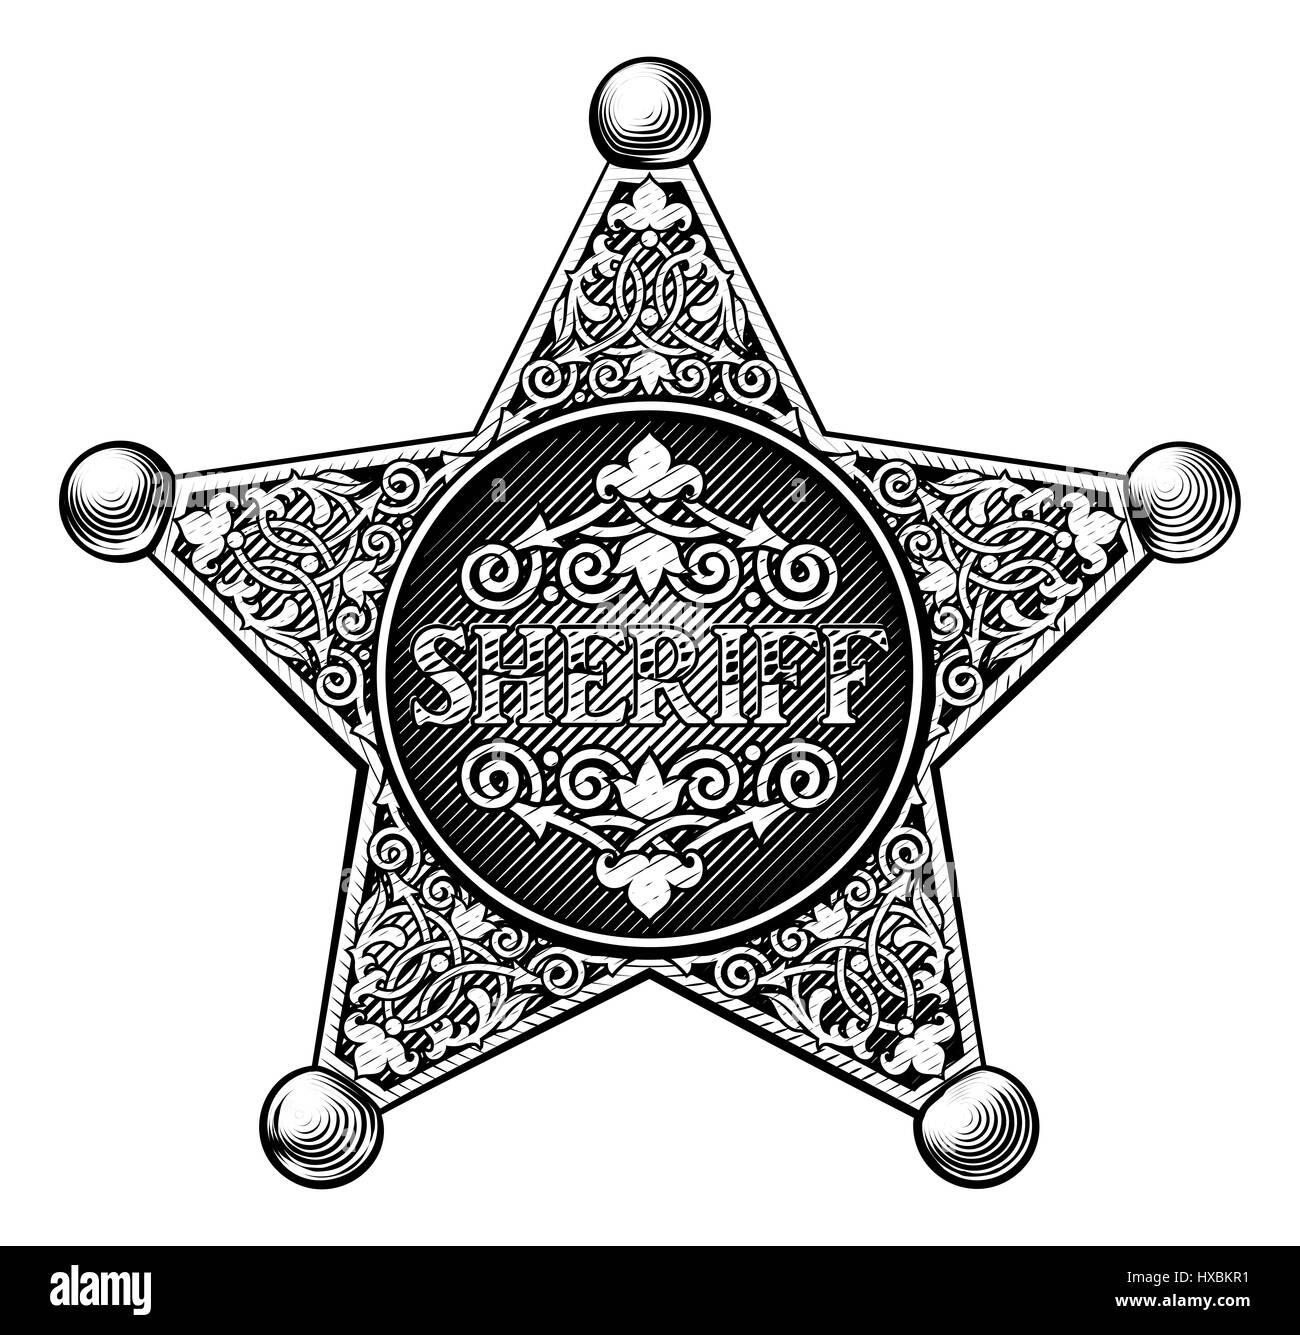 Sheriff badge in a vintage etched engraved style Stock Photo